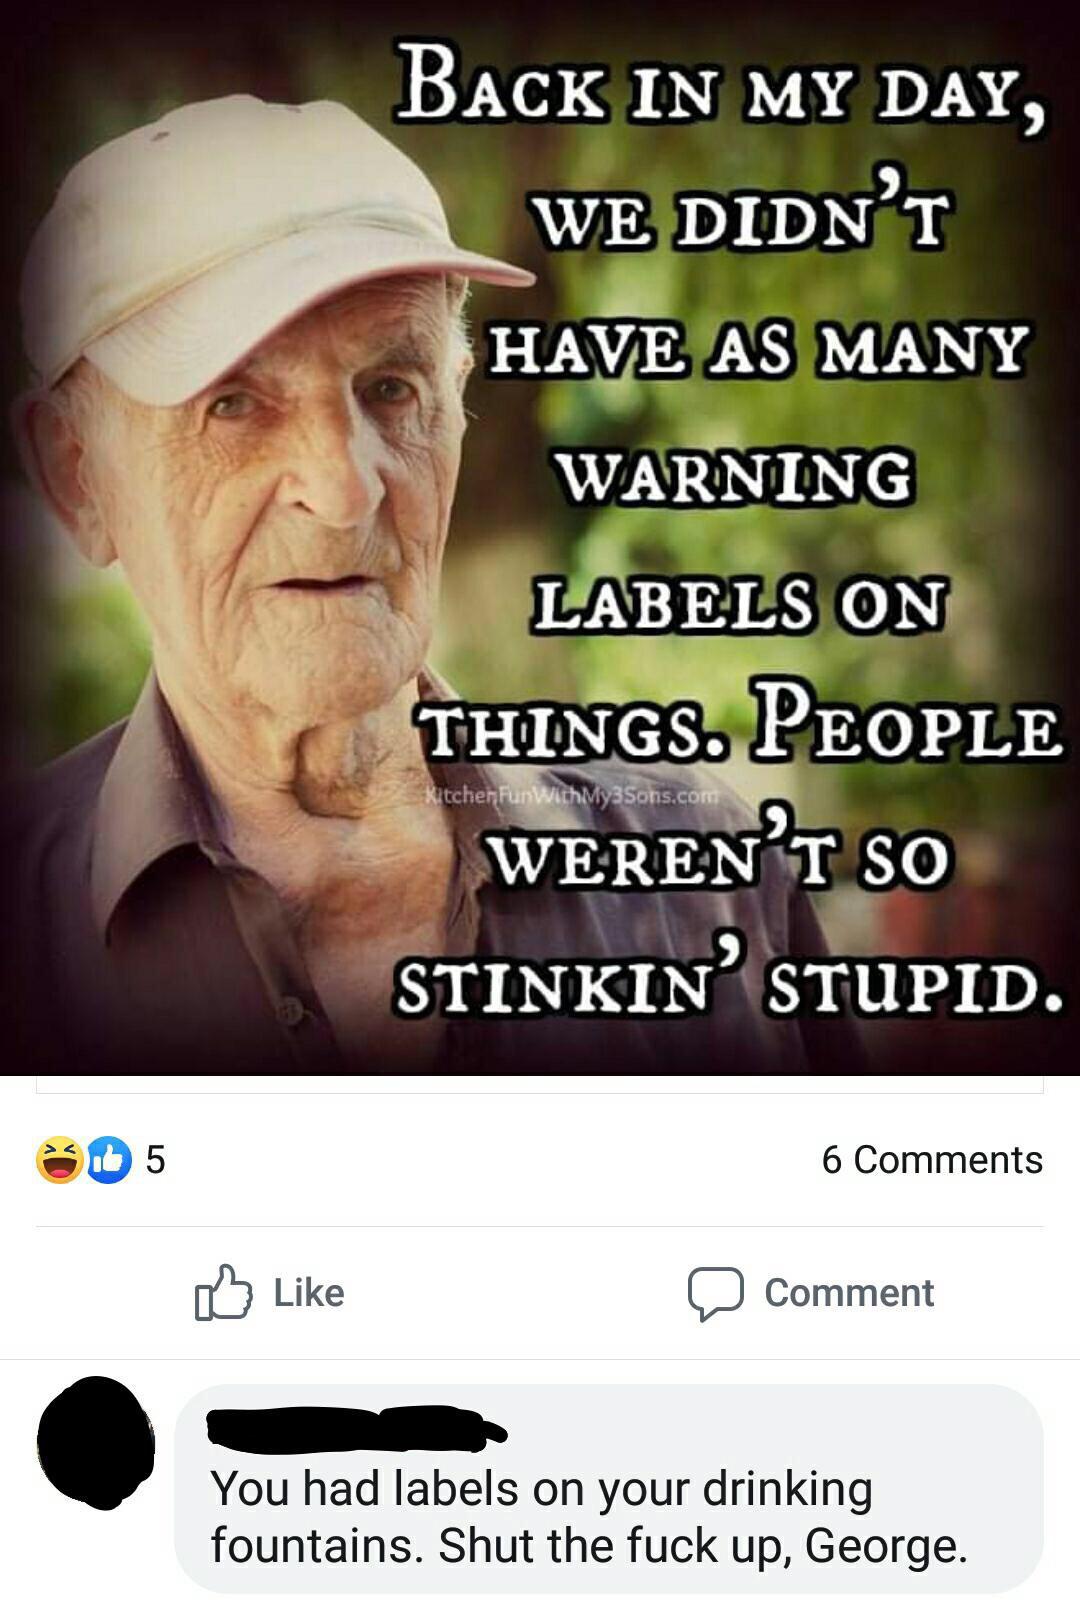 Back In My Day, We Didn'T Have As Many Warning Labels On Things. People Weren'T So Stinkin' Stupid. kitcher Fun WithMy3Sons.com 05 6 o Comment You had labels on your drinking fountains. Shut the fuck up, George.